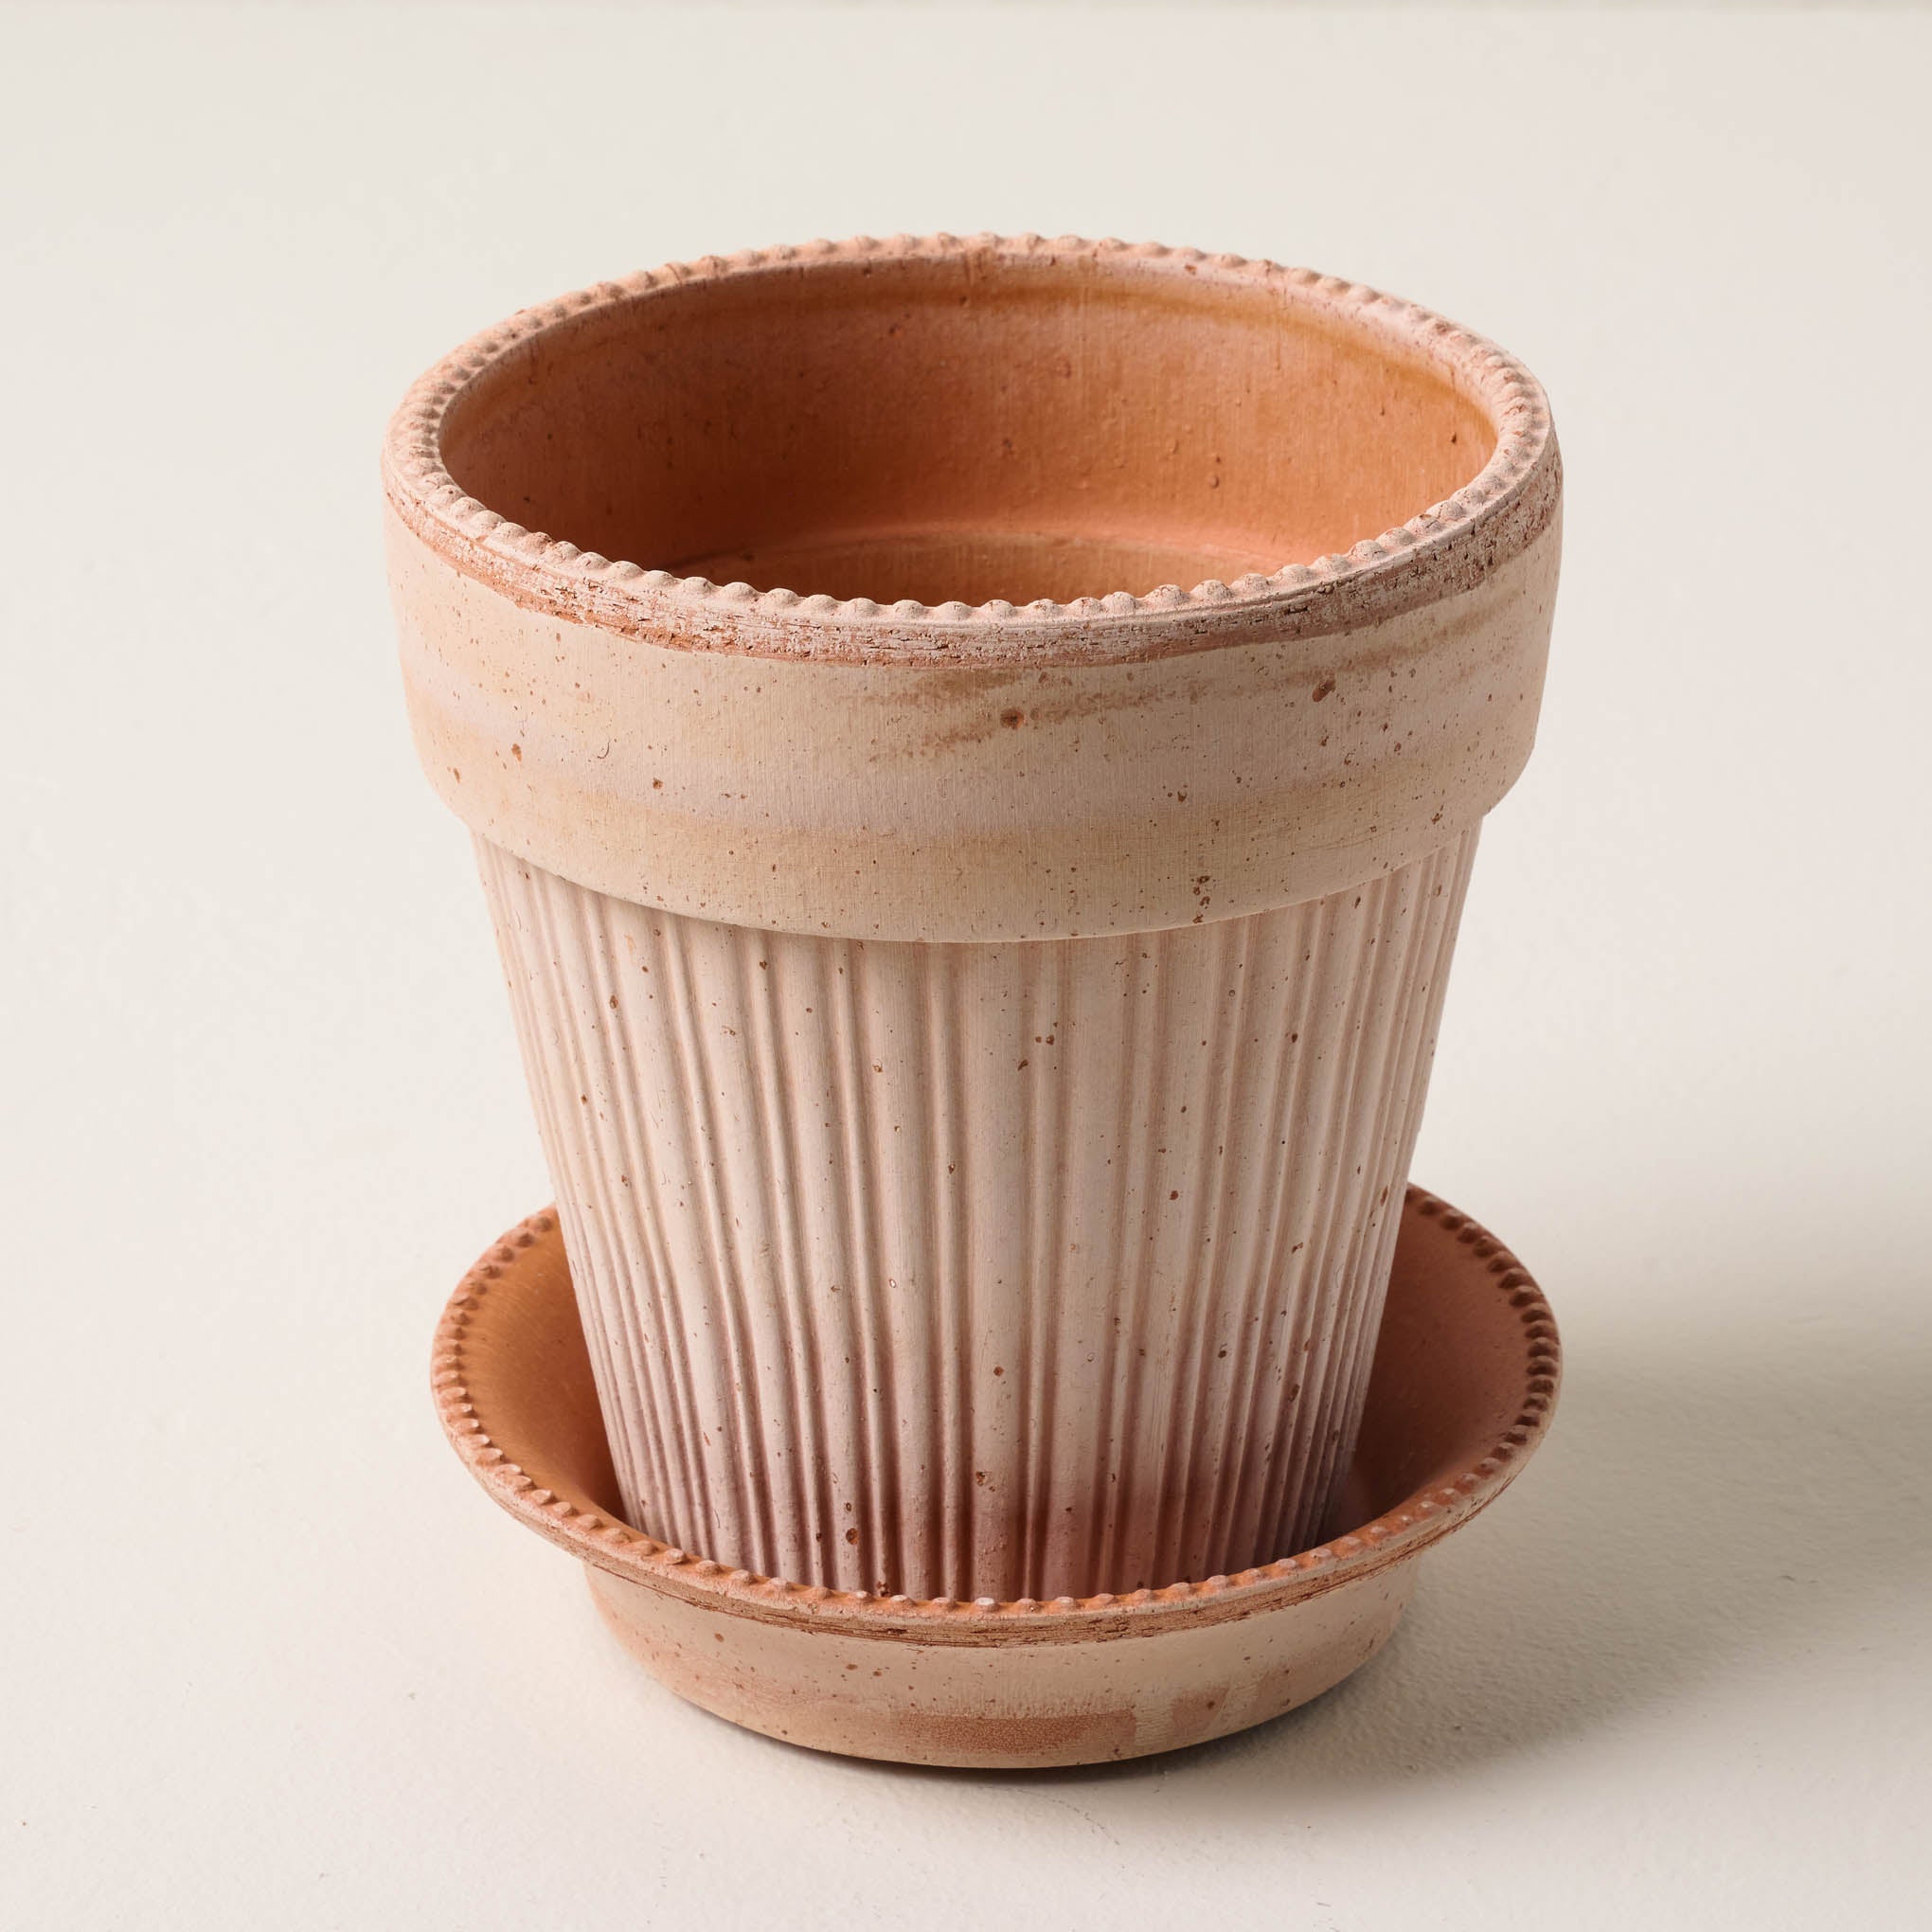 Terracotta Dotted Bergs Pot Items range from $26.00 to $36.00